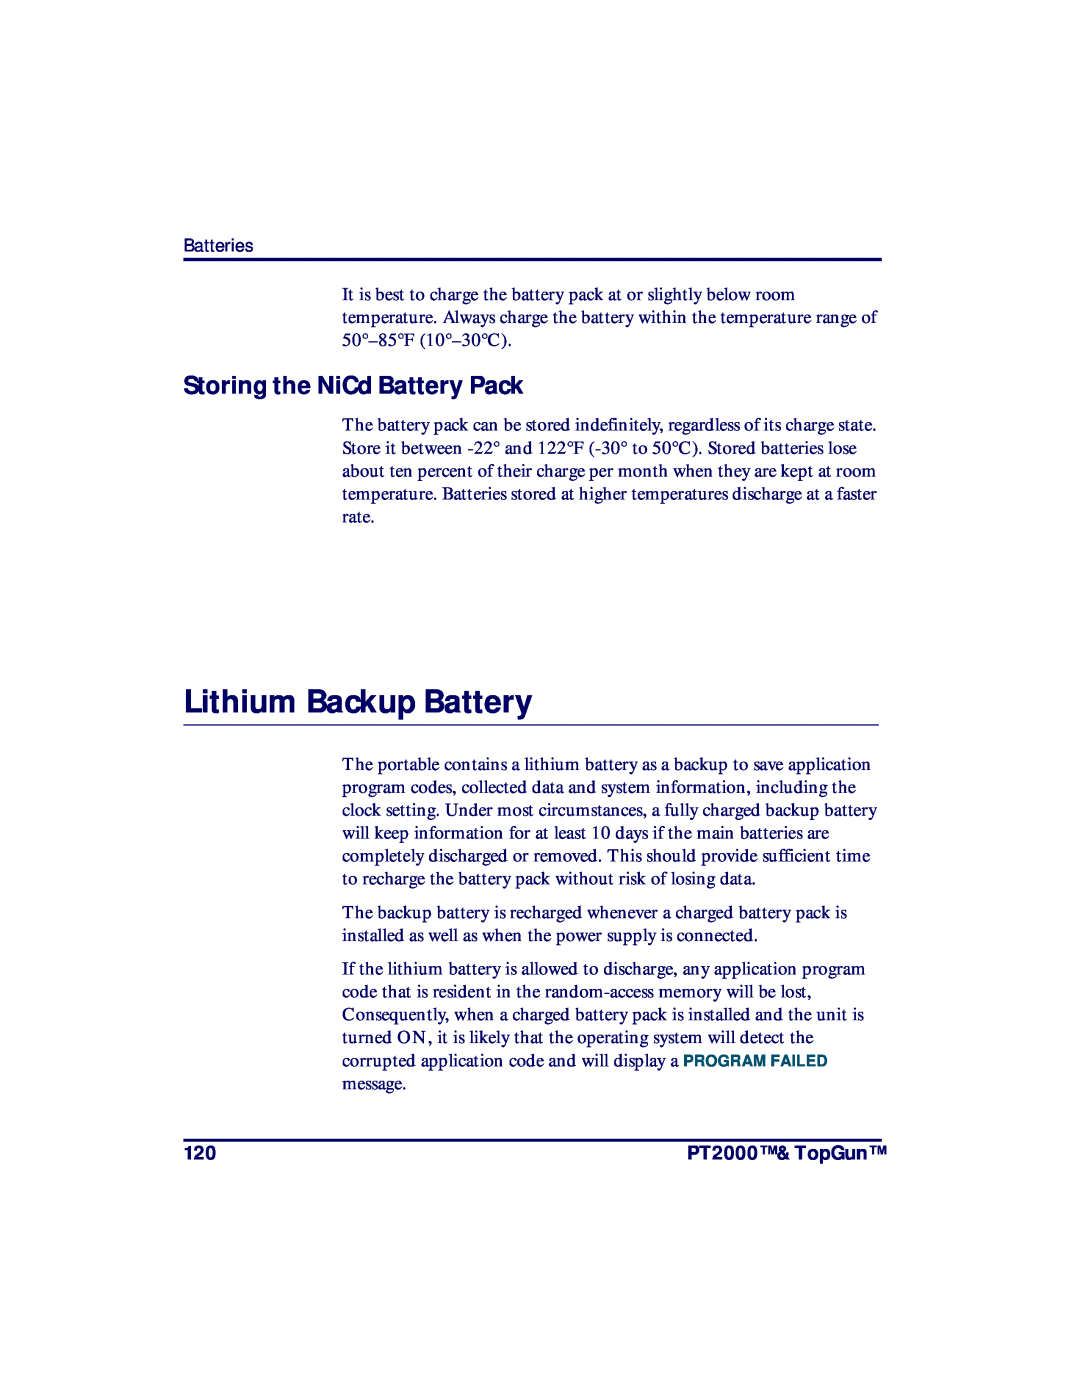 PSC TopGun, PT2000 manual Lithium Backup Battery, Storing the NiCd Battery Pack 